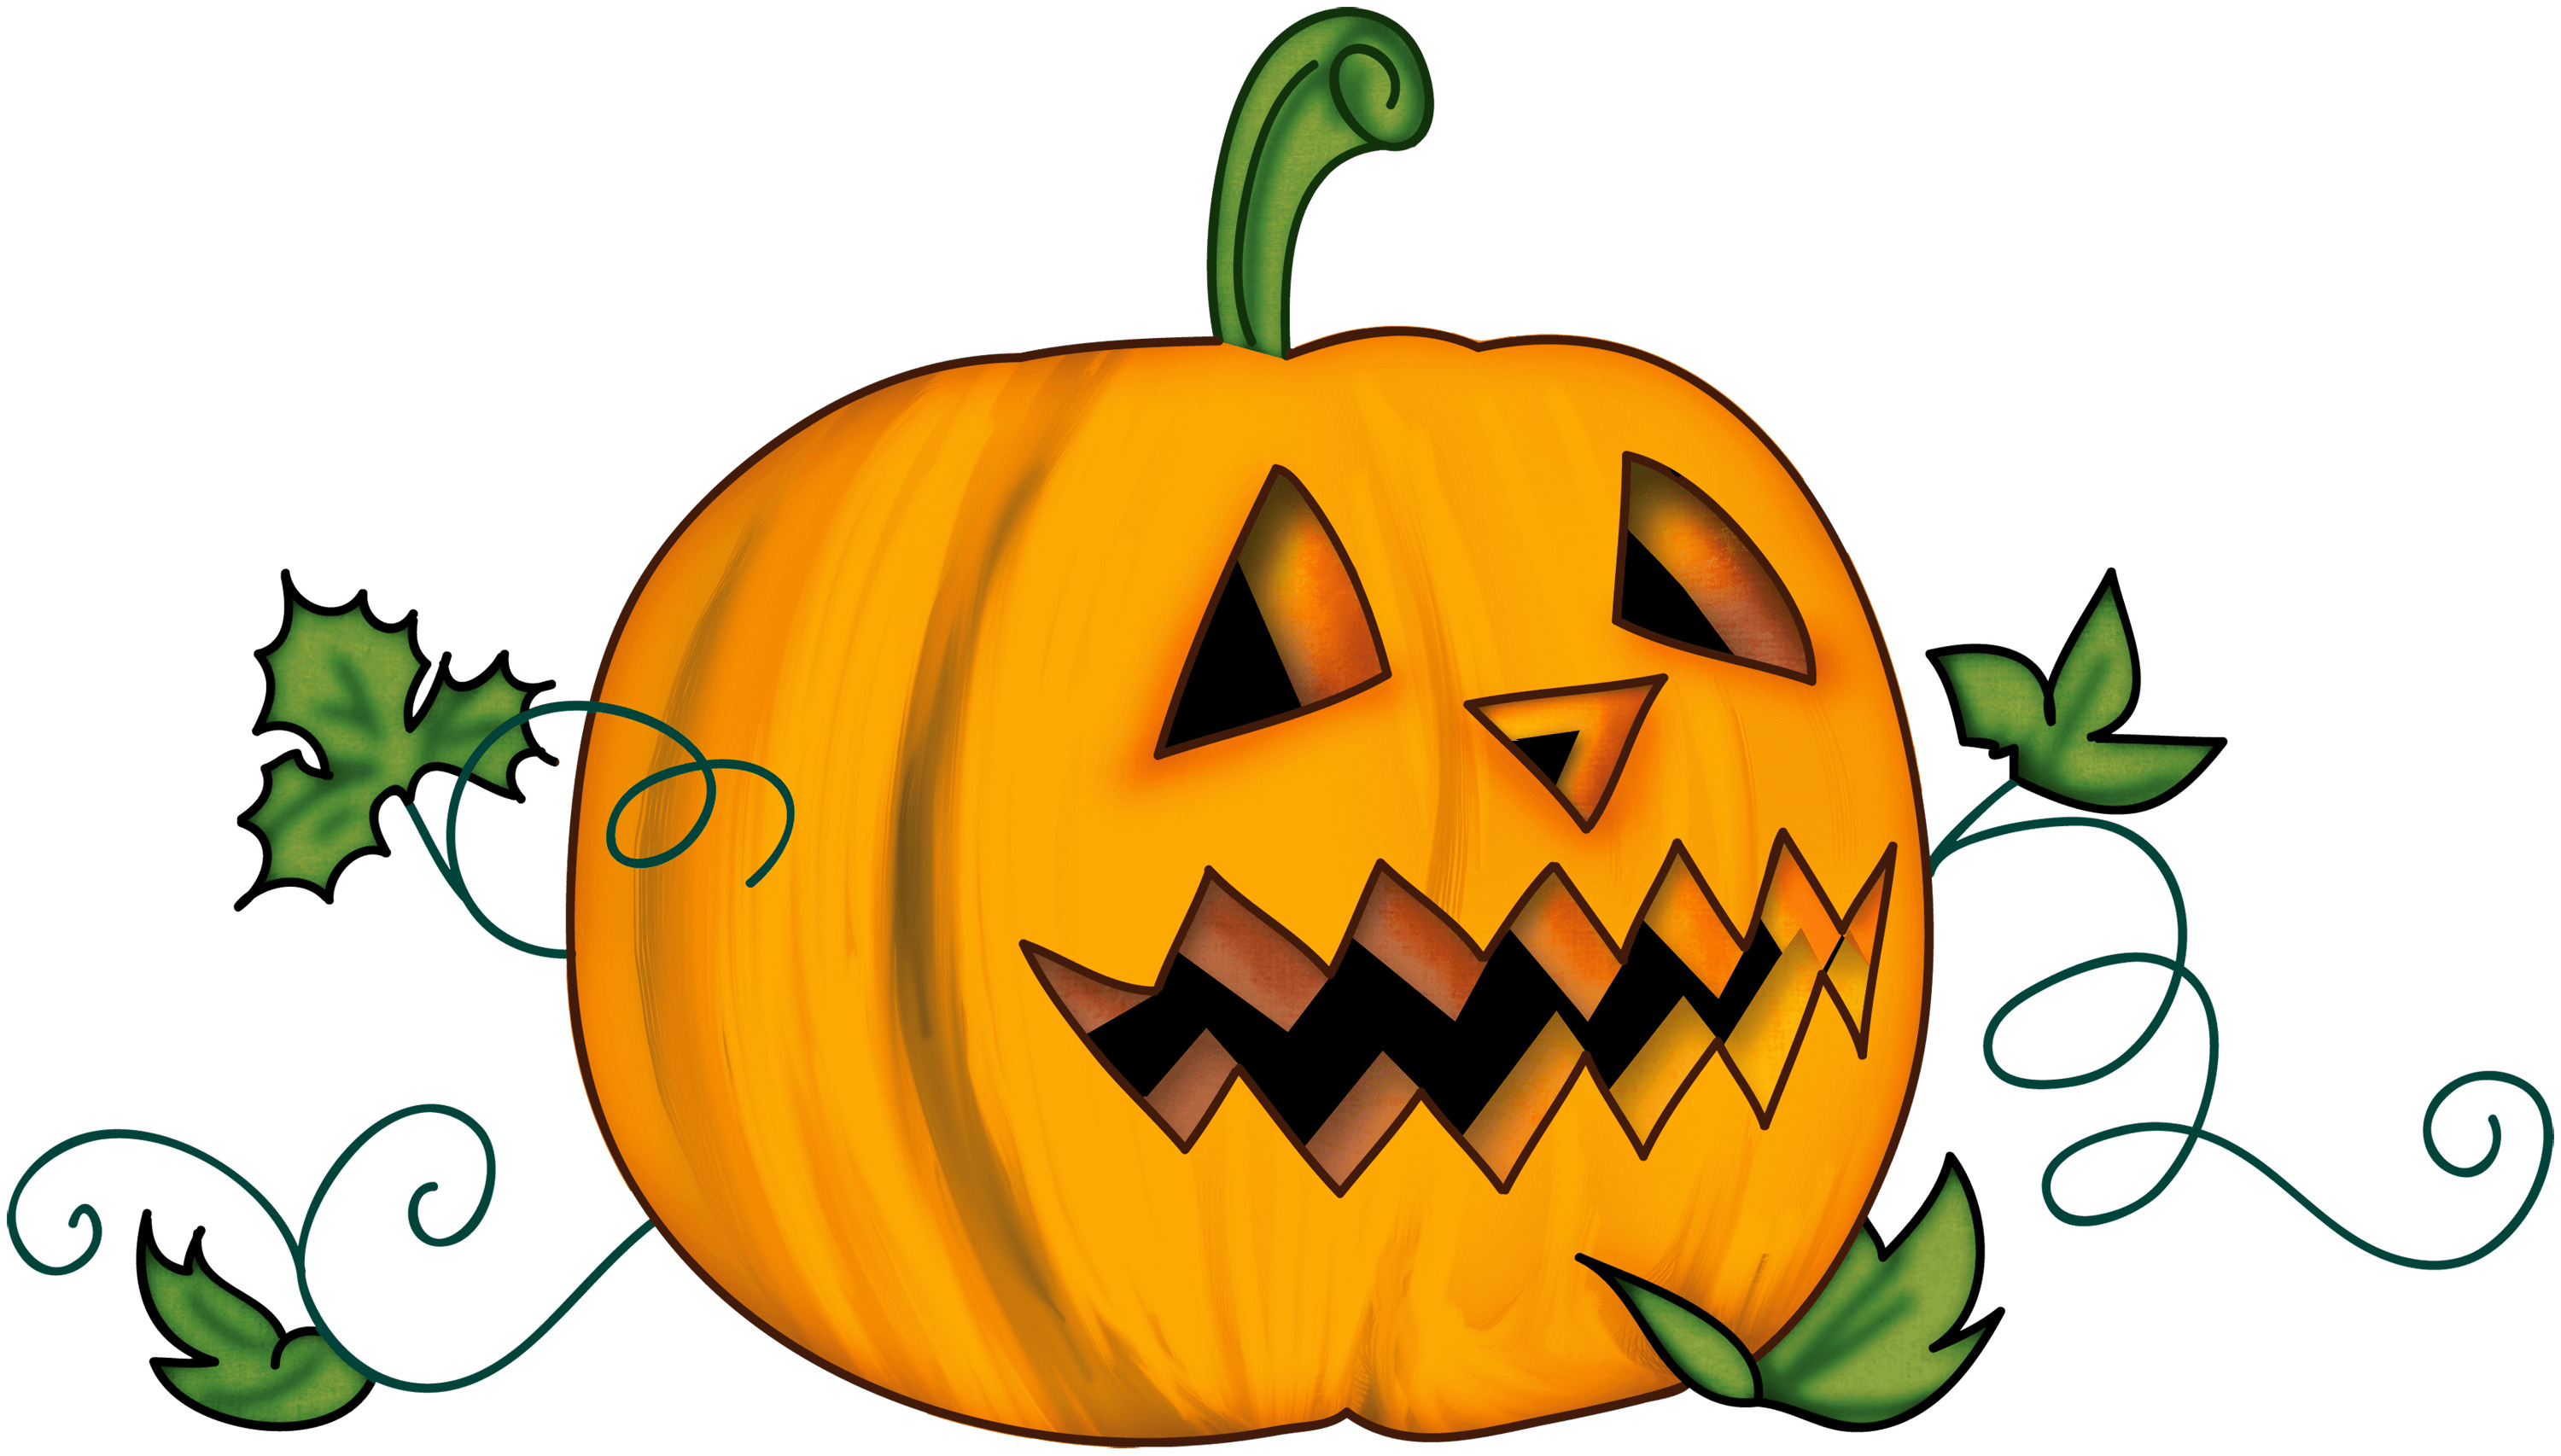 Another Pumpkin Halloween PNG icons